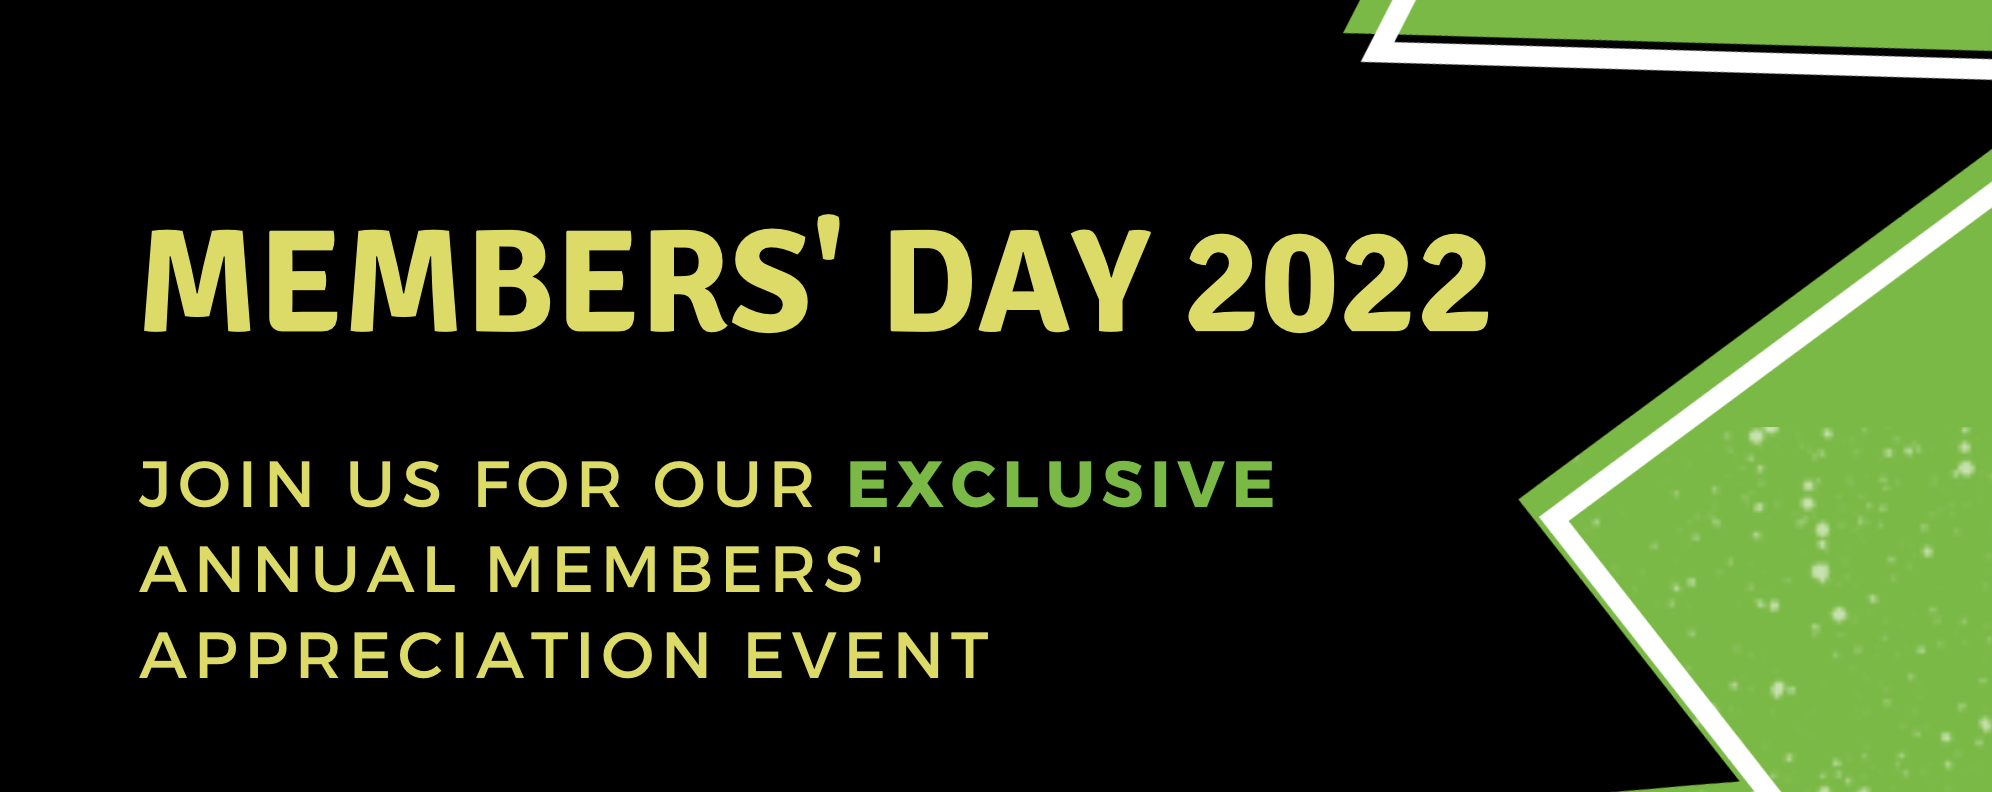 A black and green visual with the text "Members' Day 2022 - Join us for our exclusive annual members' appreciation event" written in yellow